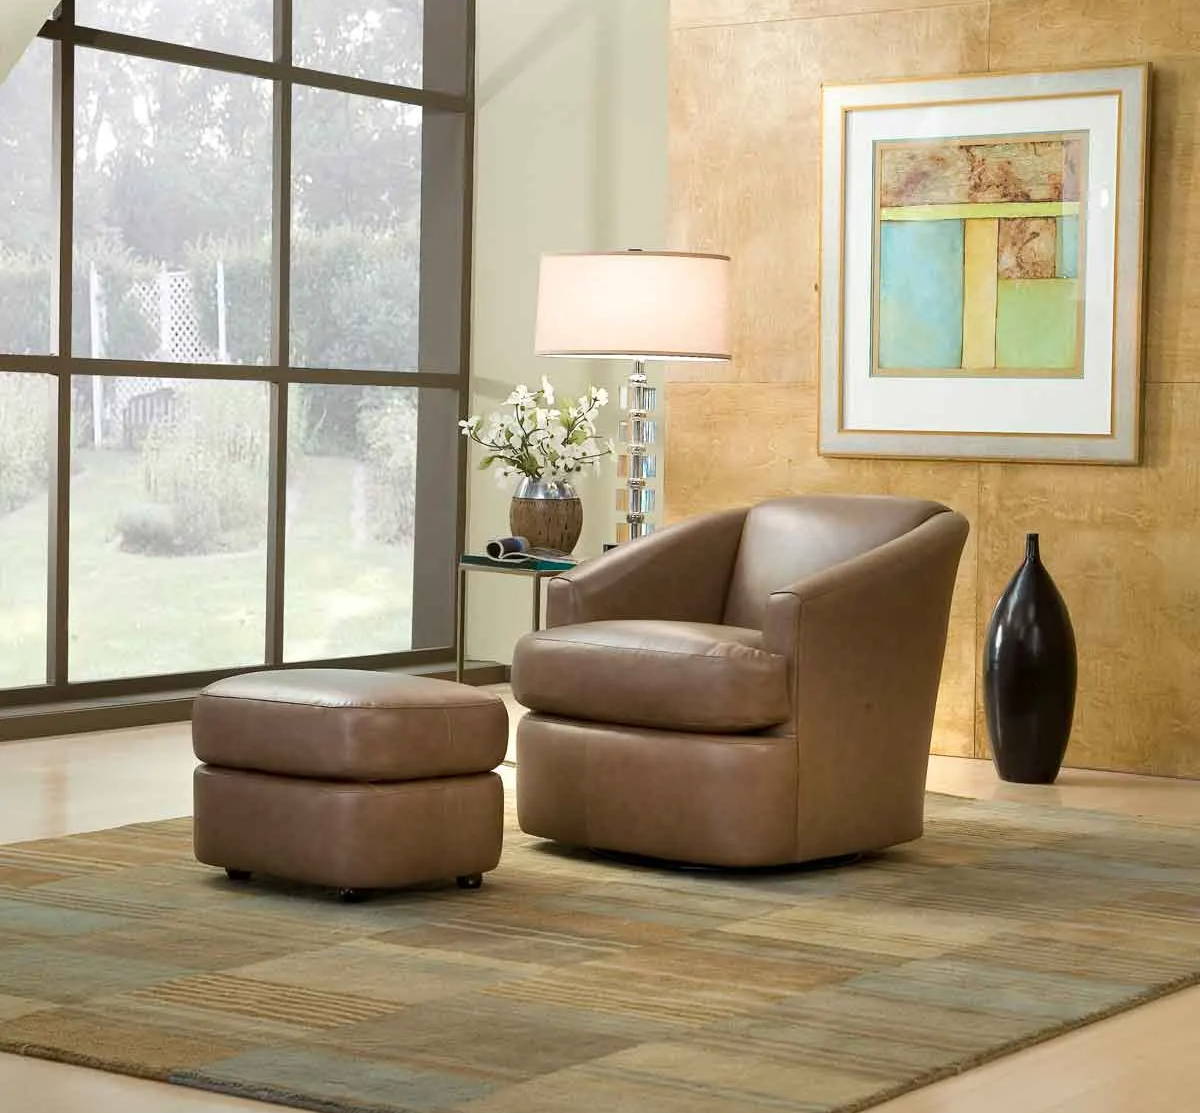 How To Keep Real Leather Upholstery From Cracking Leather Furniture Care Guide